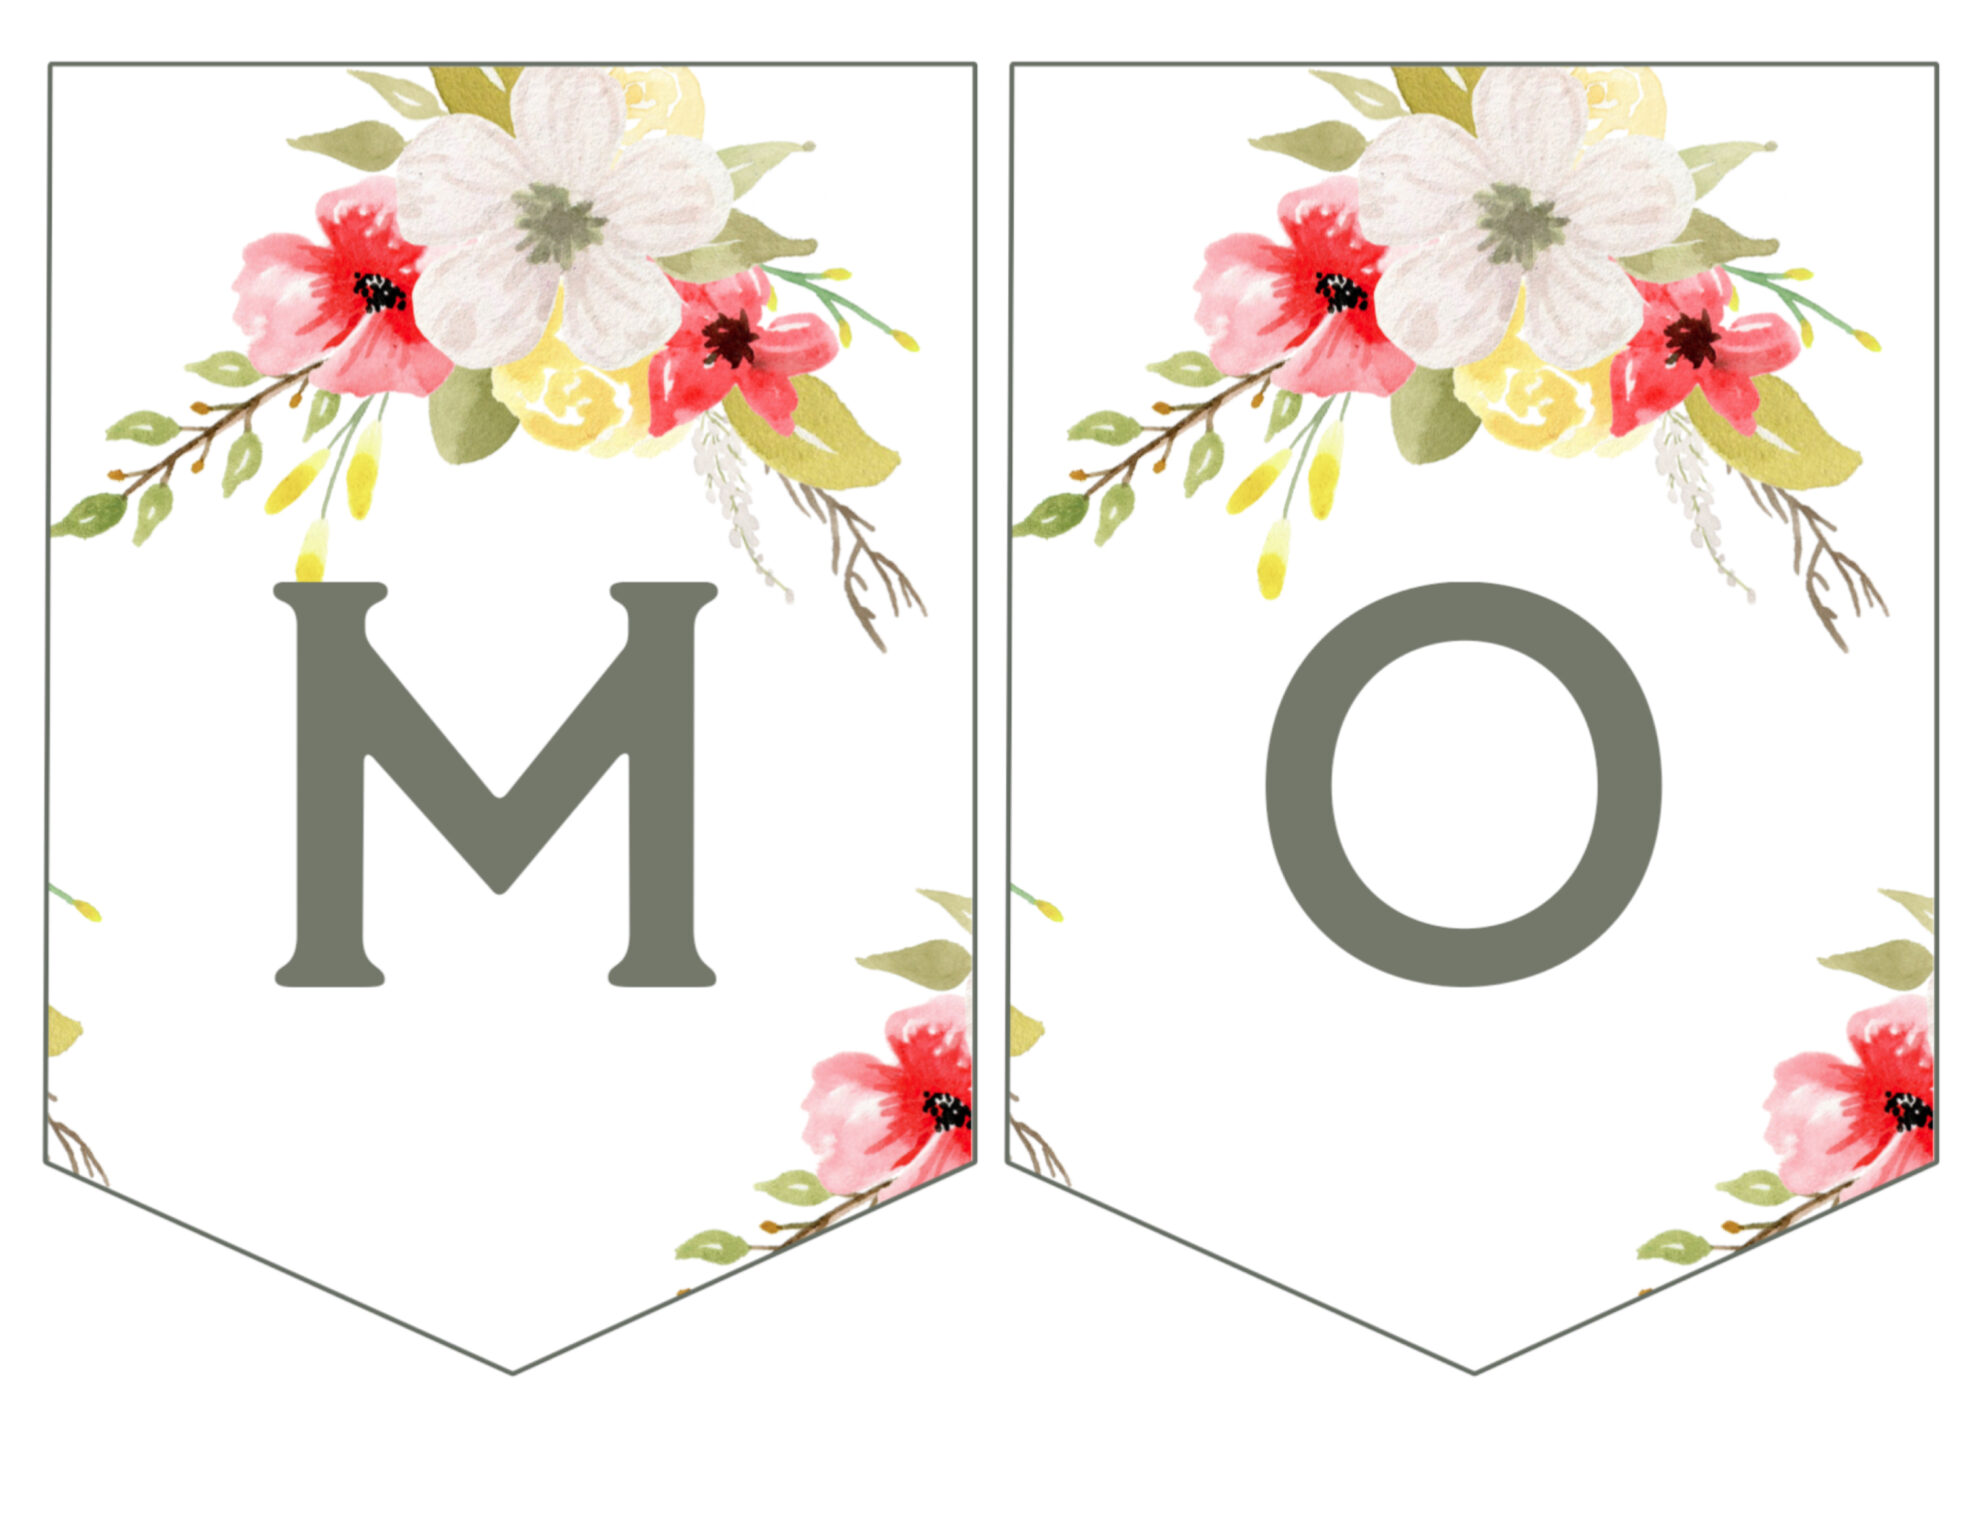 mother-s-day-banner-printable-paper-trail-design